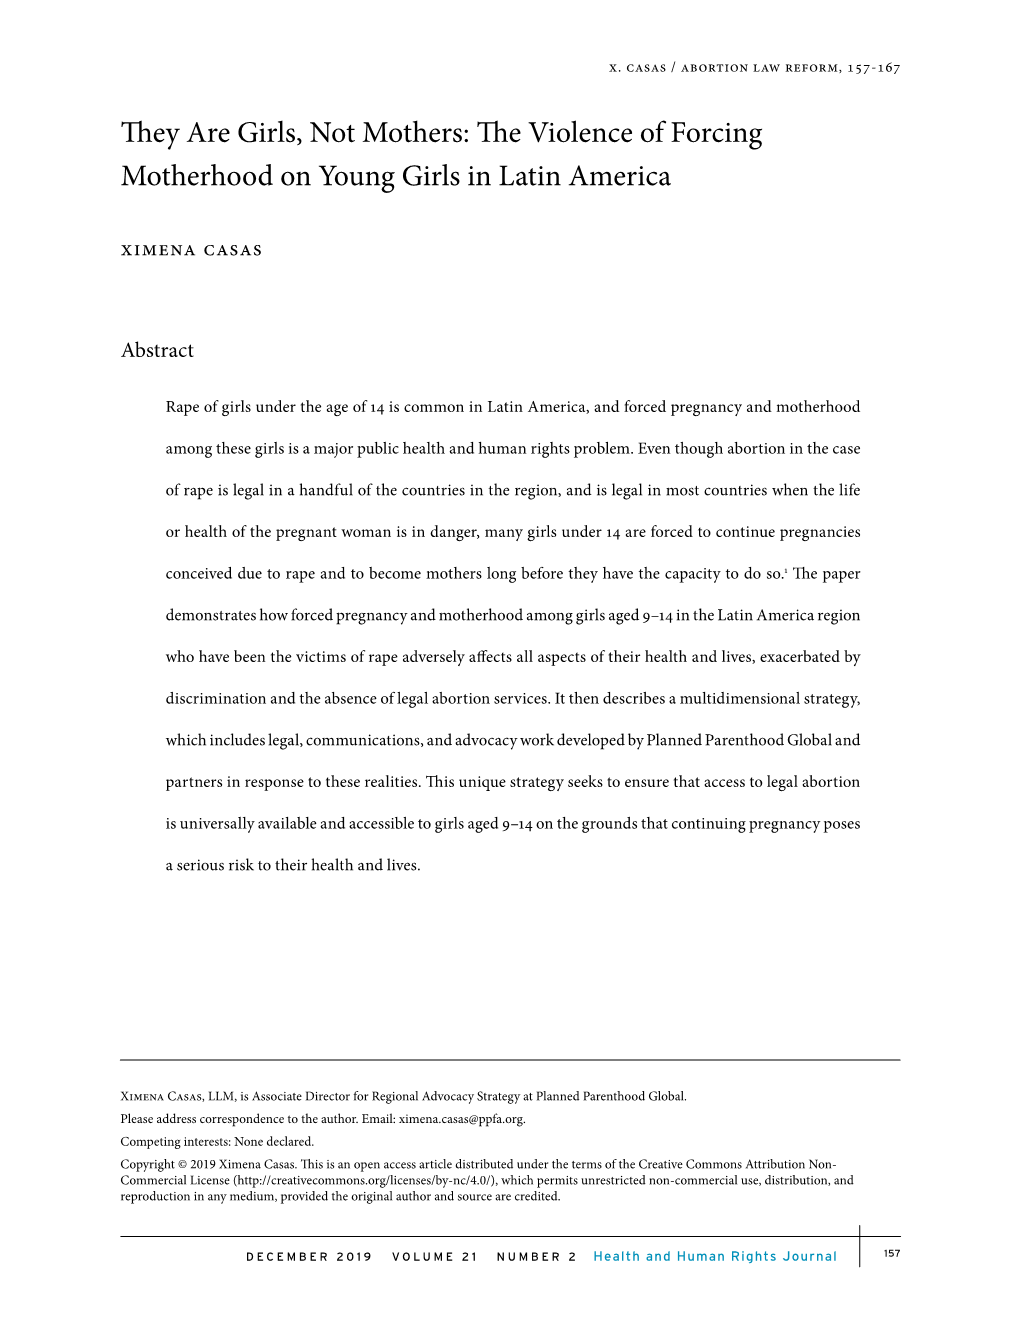 They Are Girls, Not Mothers: the Violence of Forcing Motherhood on Young Girls in Latin America Ximena Casas